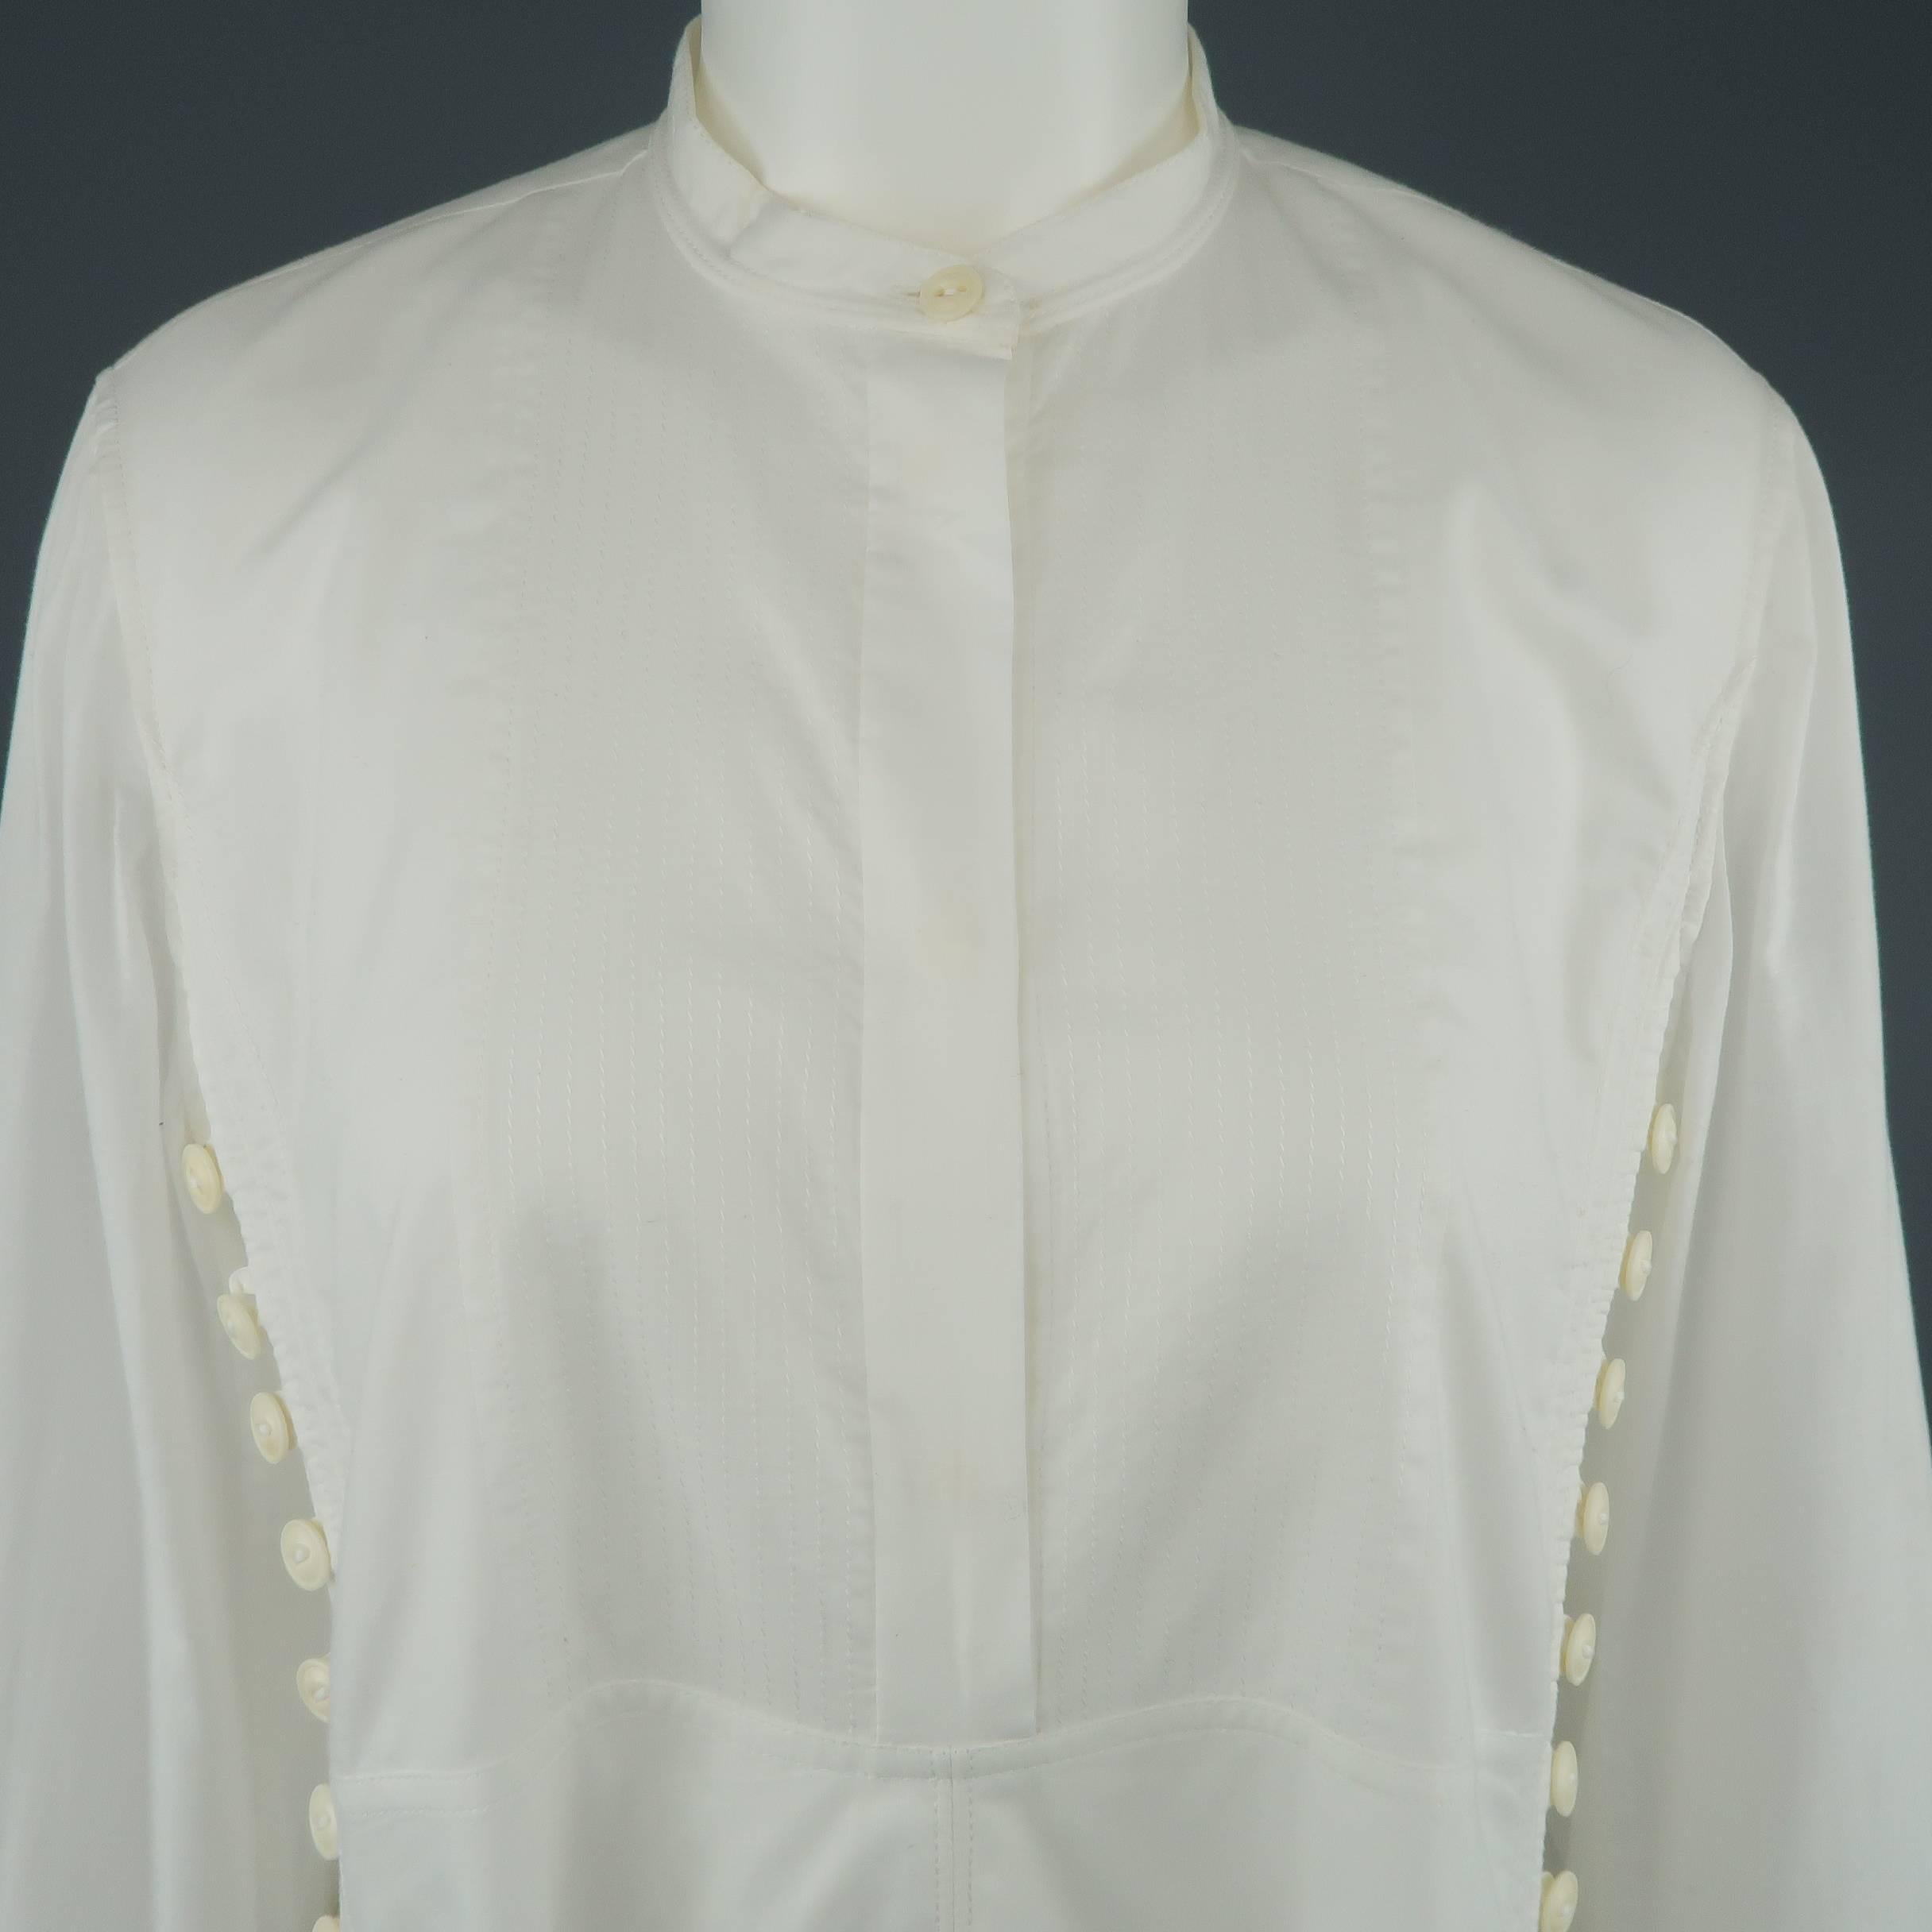 CHLOE tunic comes in semi sheer white cotton with a band collar, empire waist, embroidered chest panel, tied cuffs, and buttoned sides. Wear it as a mini dress or a top.
 
Good Pre-Owned Condition.
Marked: FR 43
 
Measurements:
 
Shoulder: 15.5